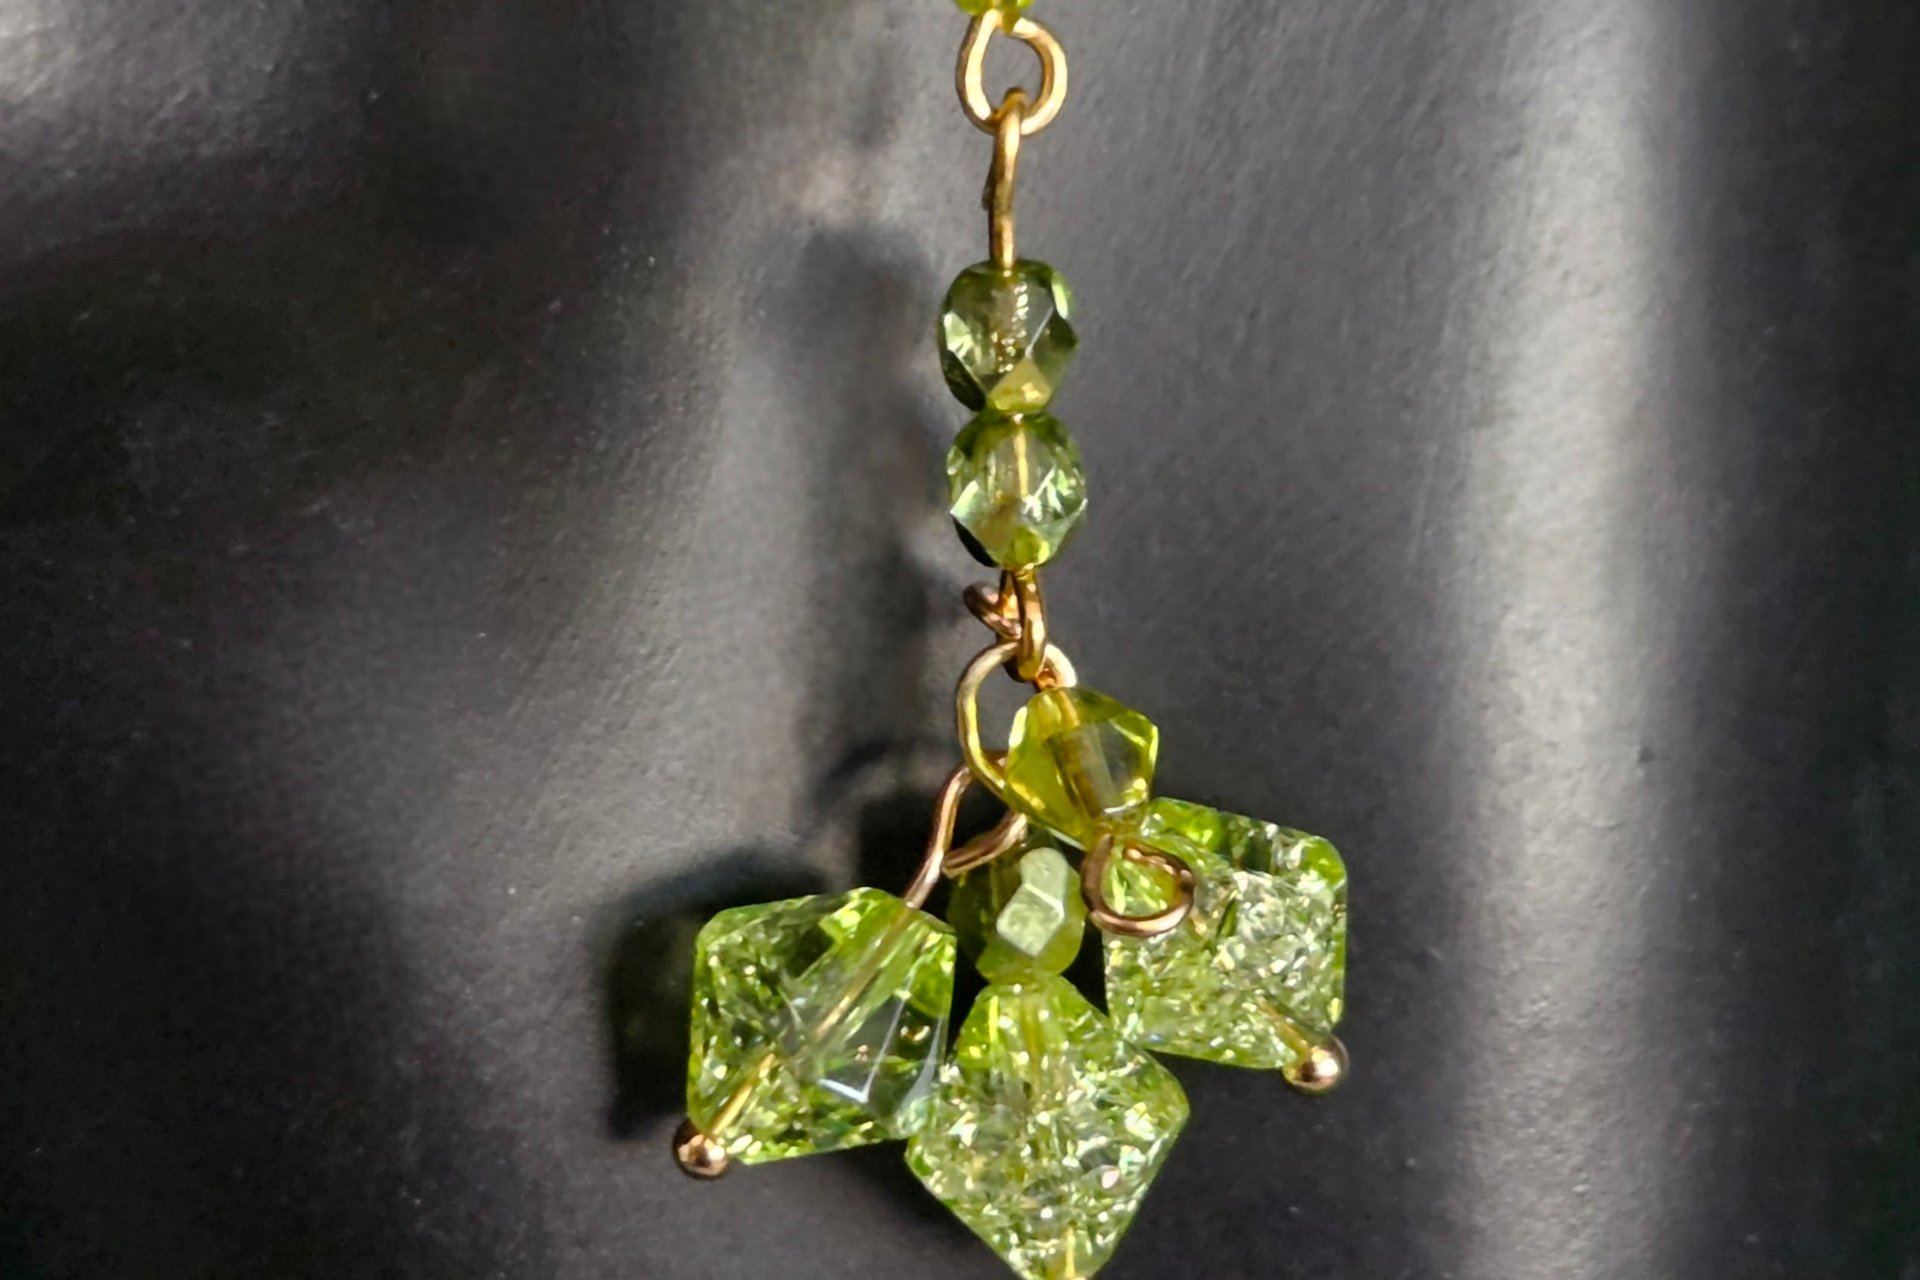 Green Cracked Glass and Crystal  Earring